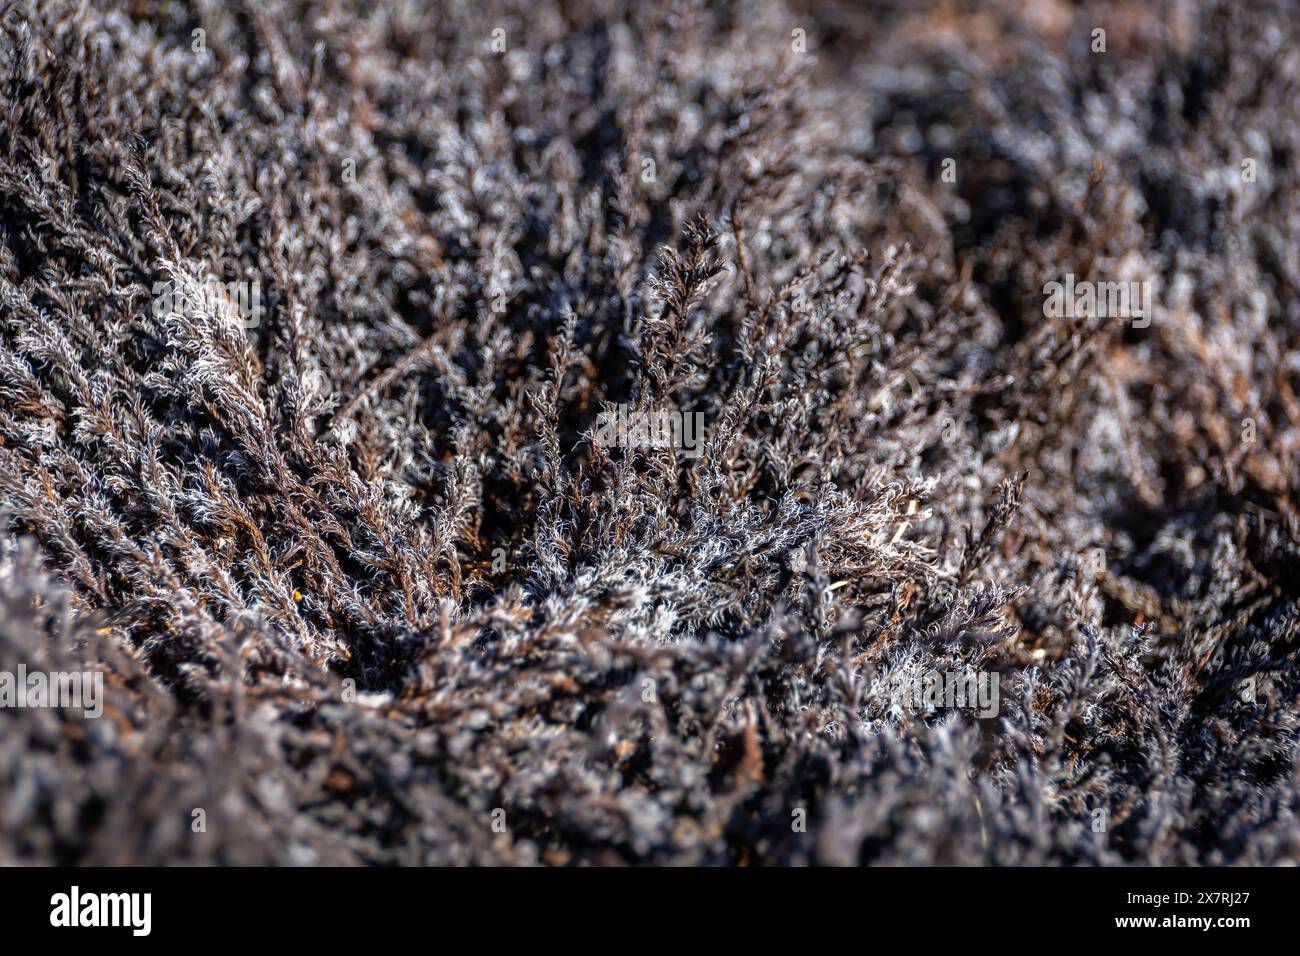 Black dead moss covered with volcanic ashes after eruption in Fagradalsfjall volcano lava field, Iceland, close-up view. Stock Photo